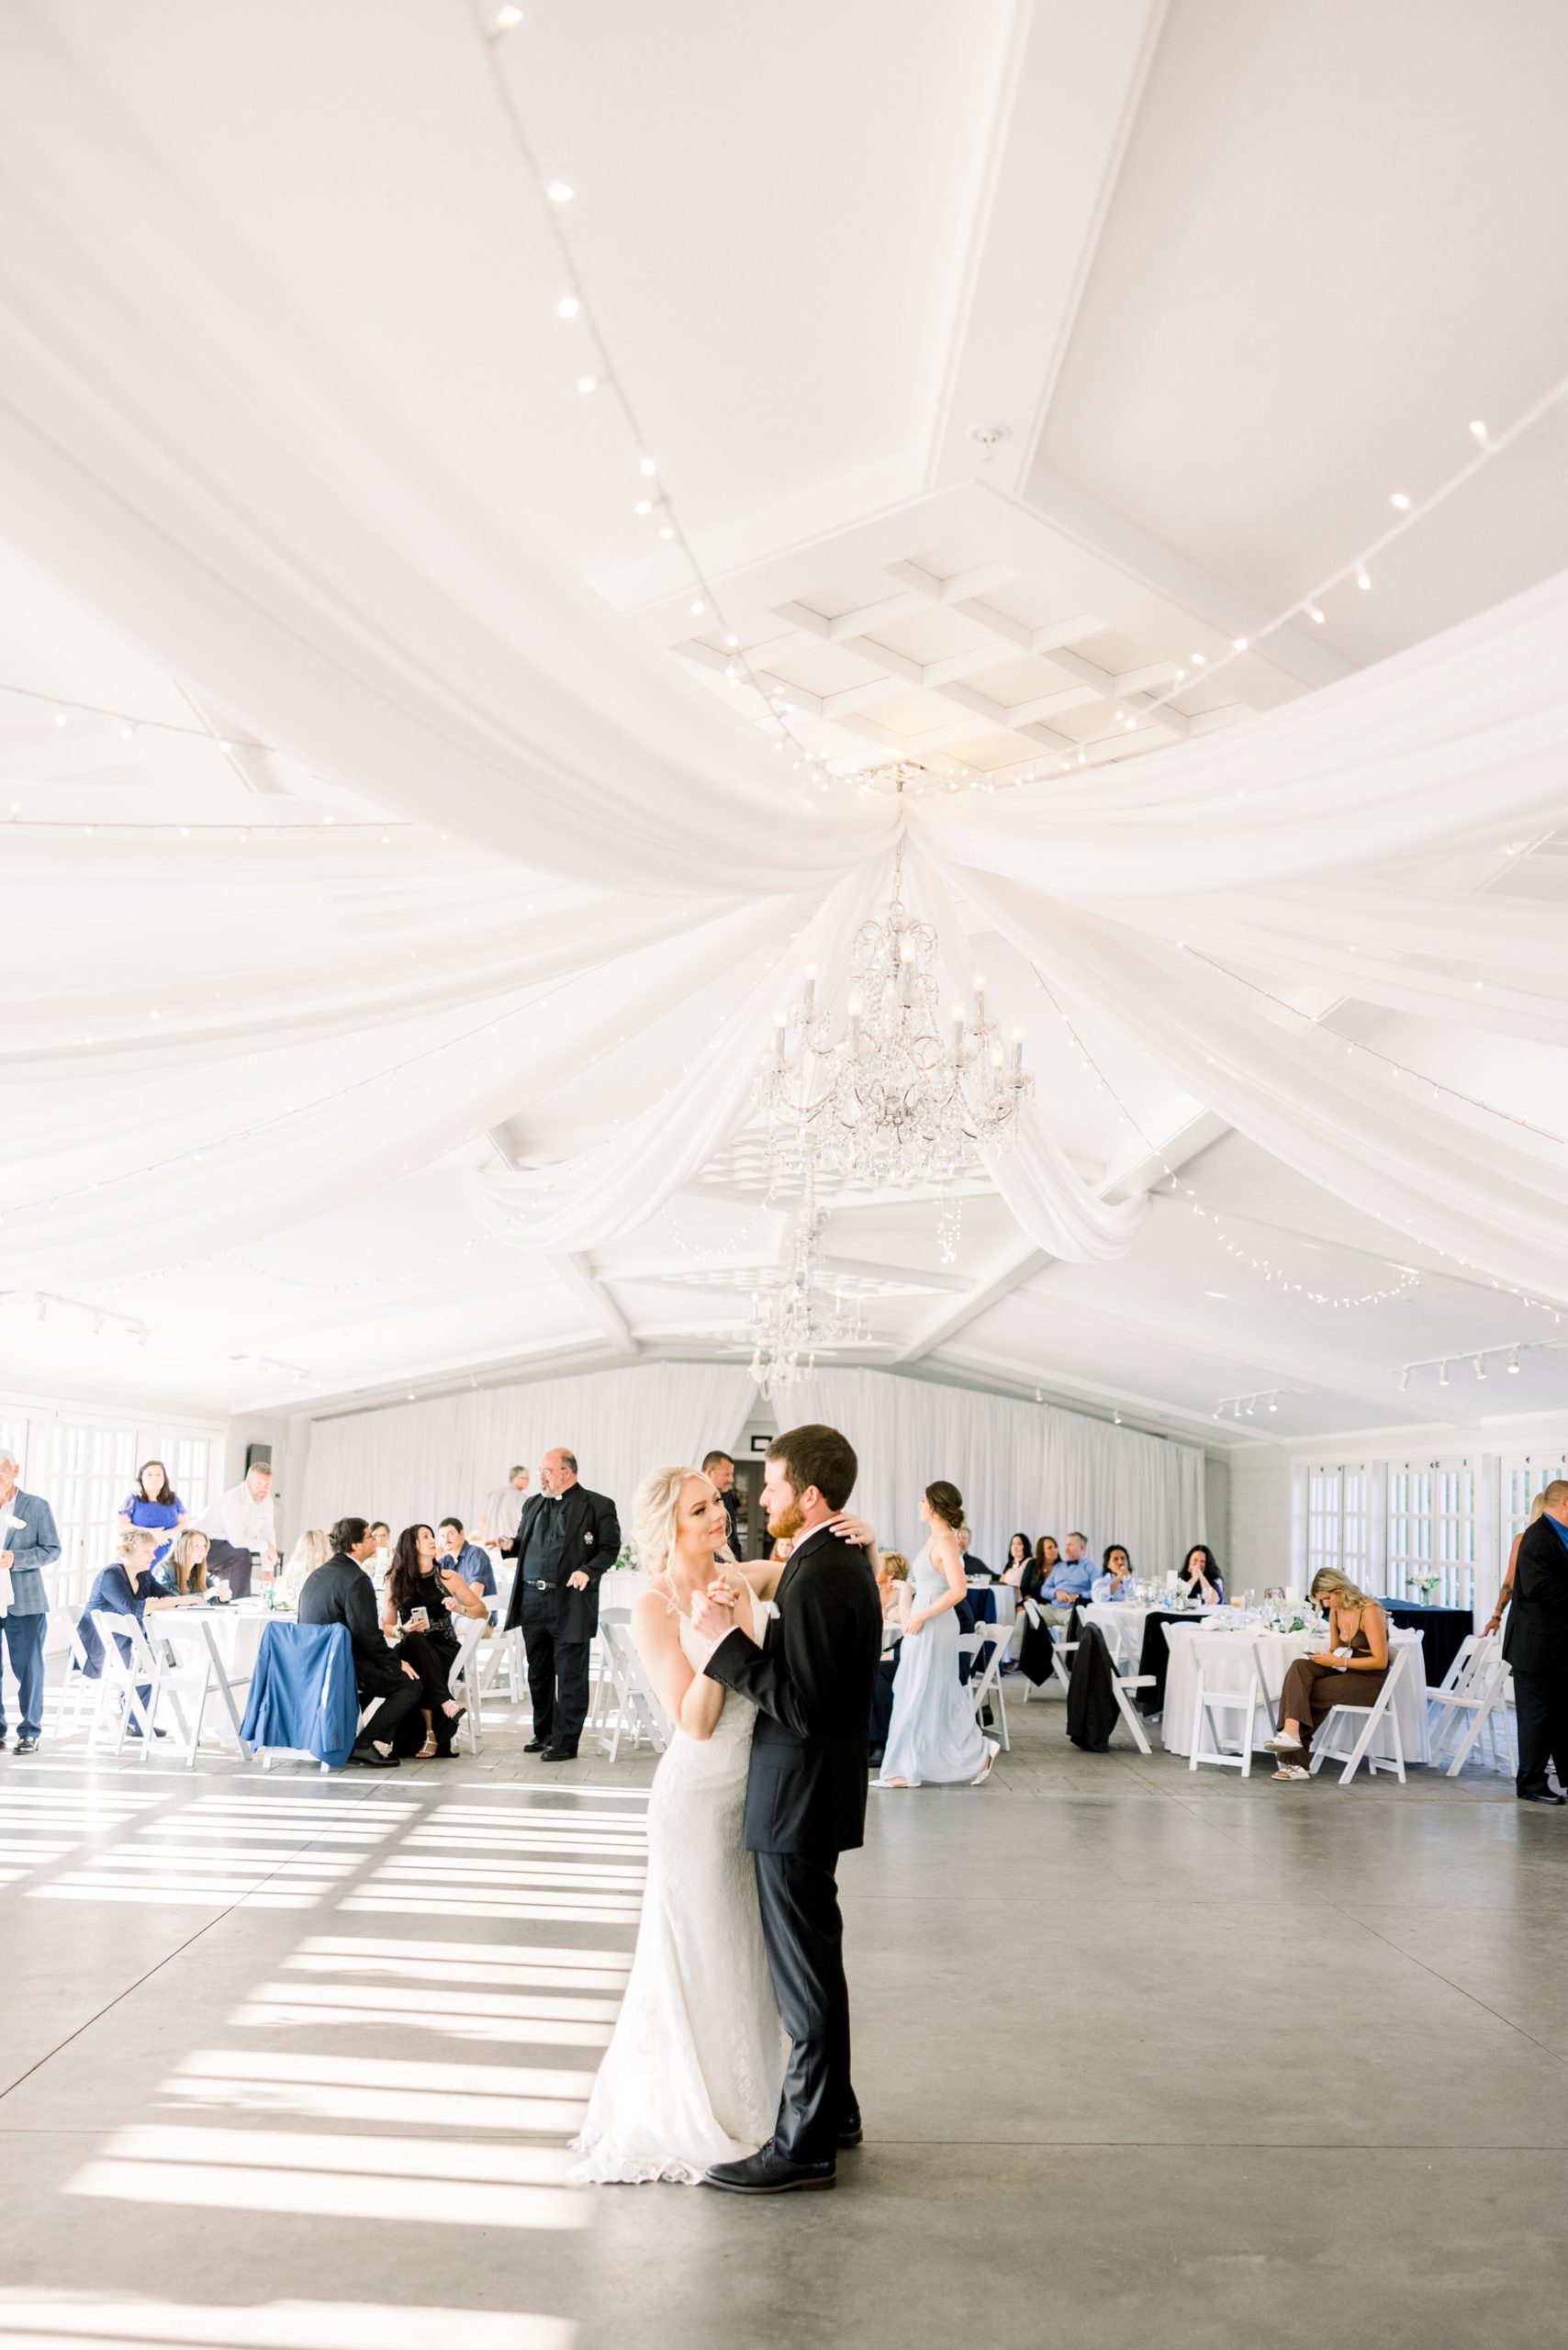 Bride and Groom share first dance in East Garden Room at Castle Farms wedding in Charlevoix, MI